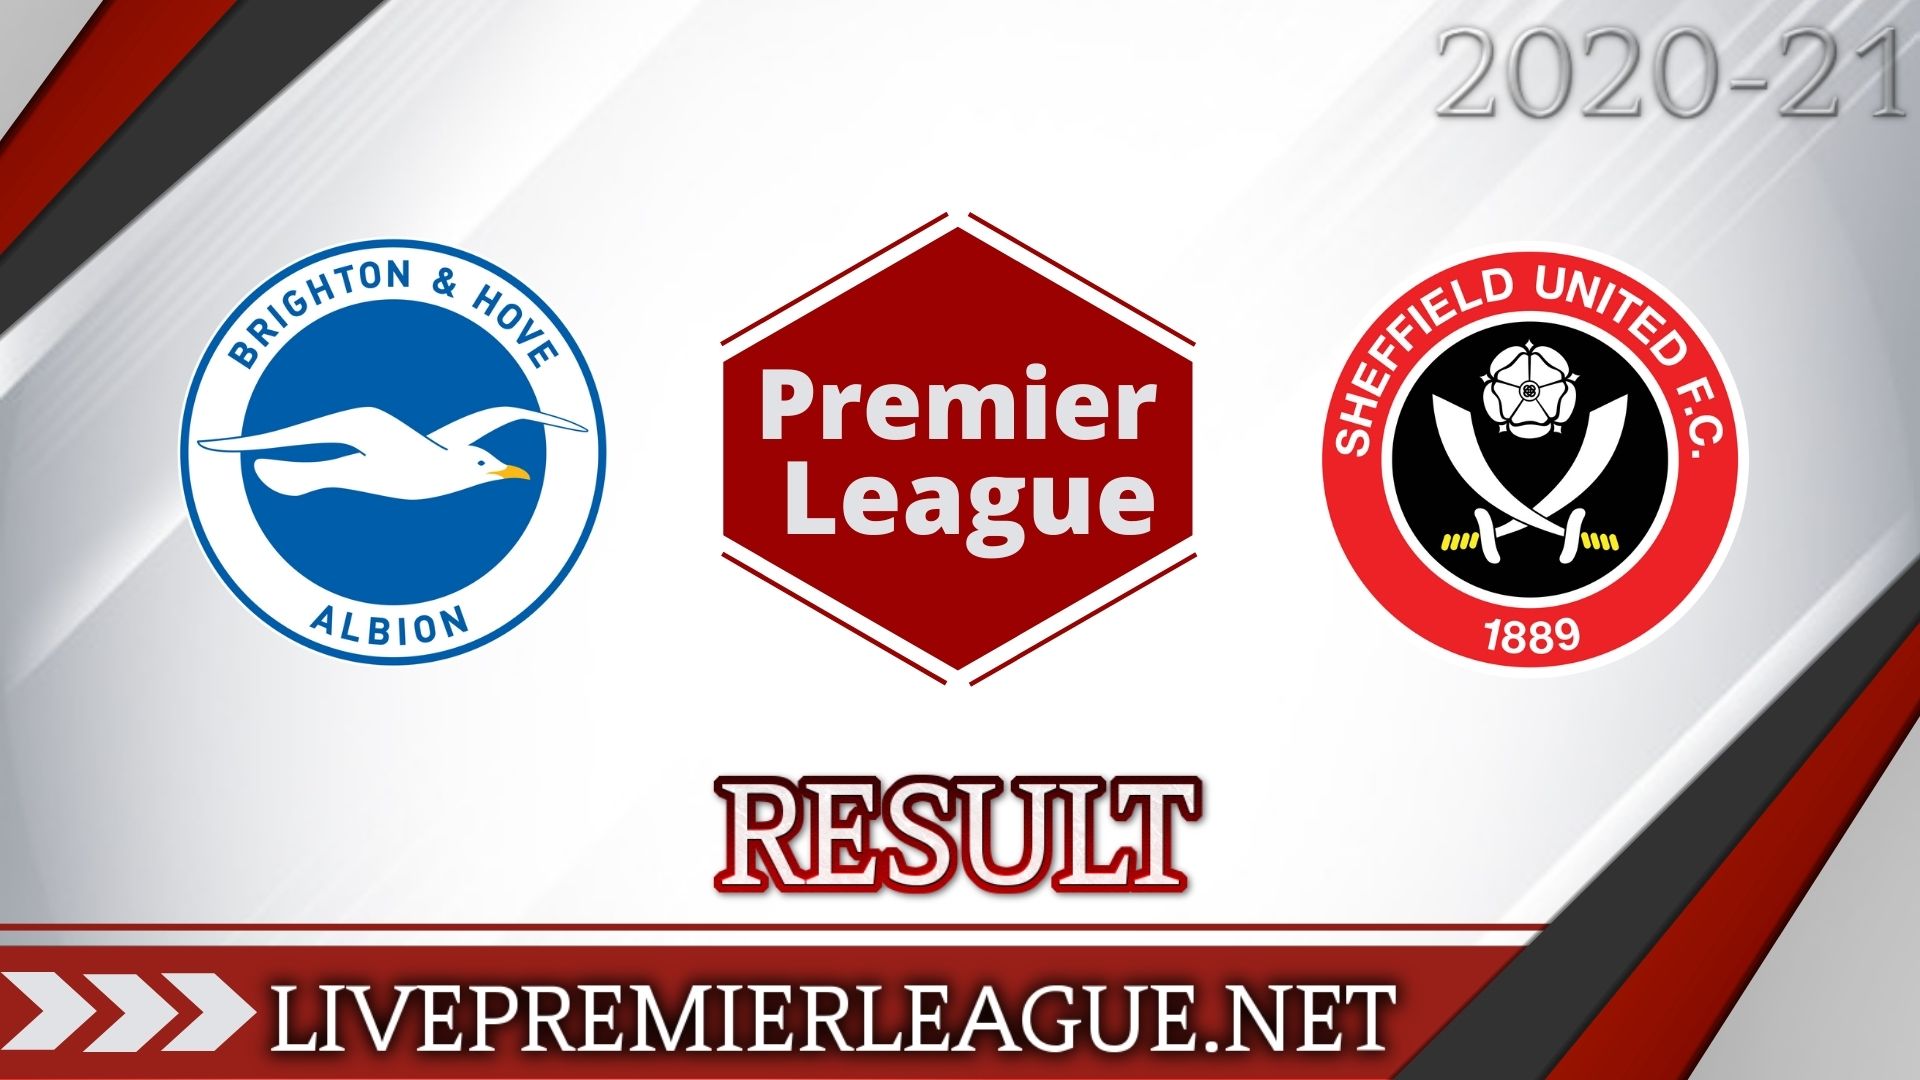 Brighton and Hove Albion Vs Sheffield United | Week 14 Result 2020